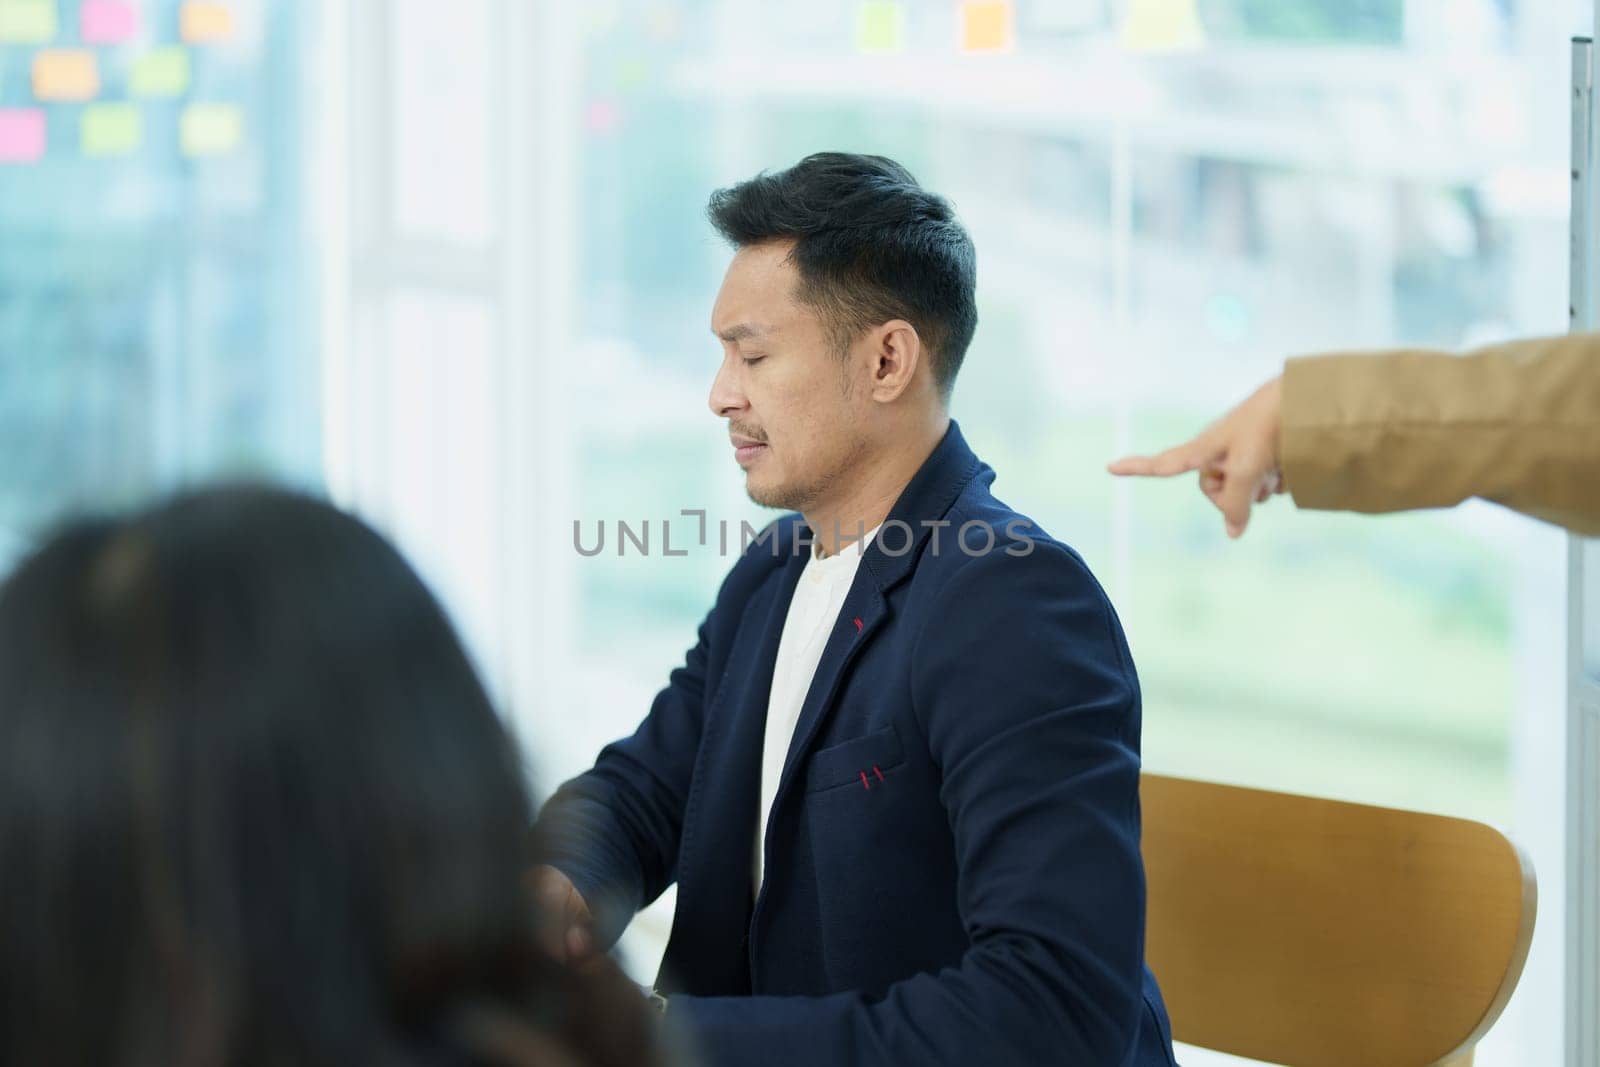 An image of an Asian male employee looking worried and sad about being scolded by his boss for failing to meet sales targets, concept of disappointment and failure in his career.